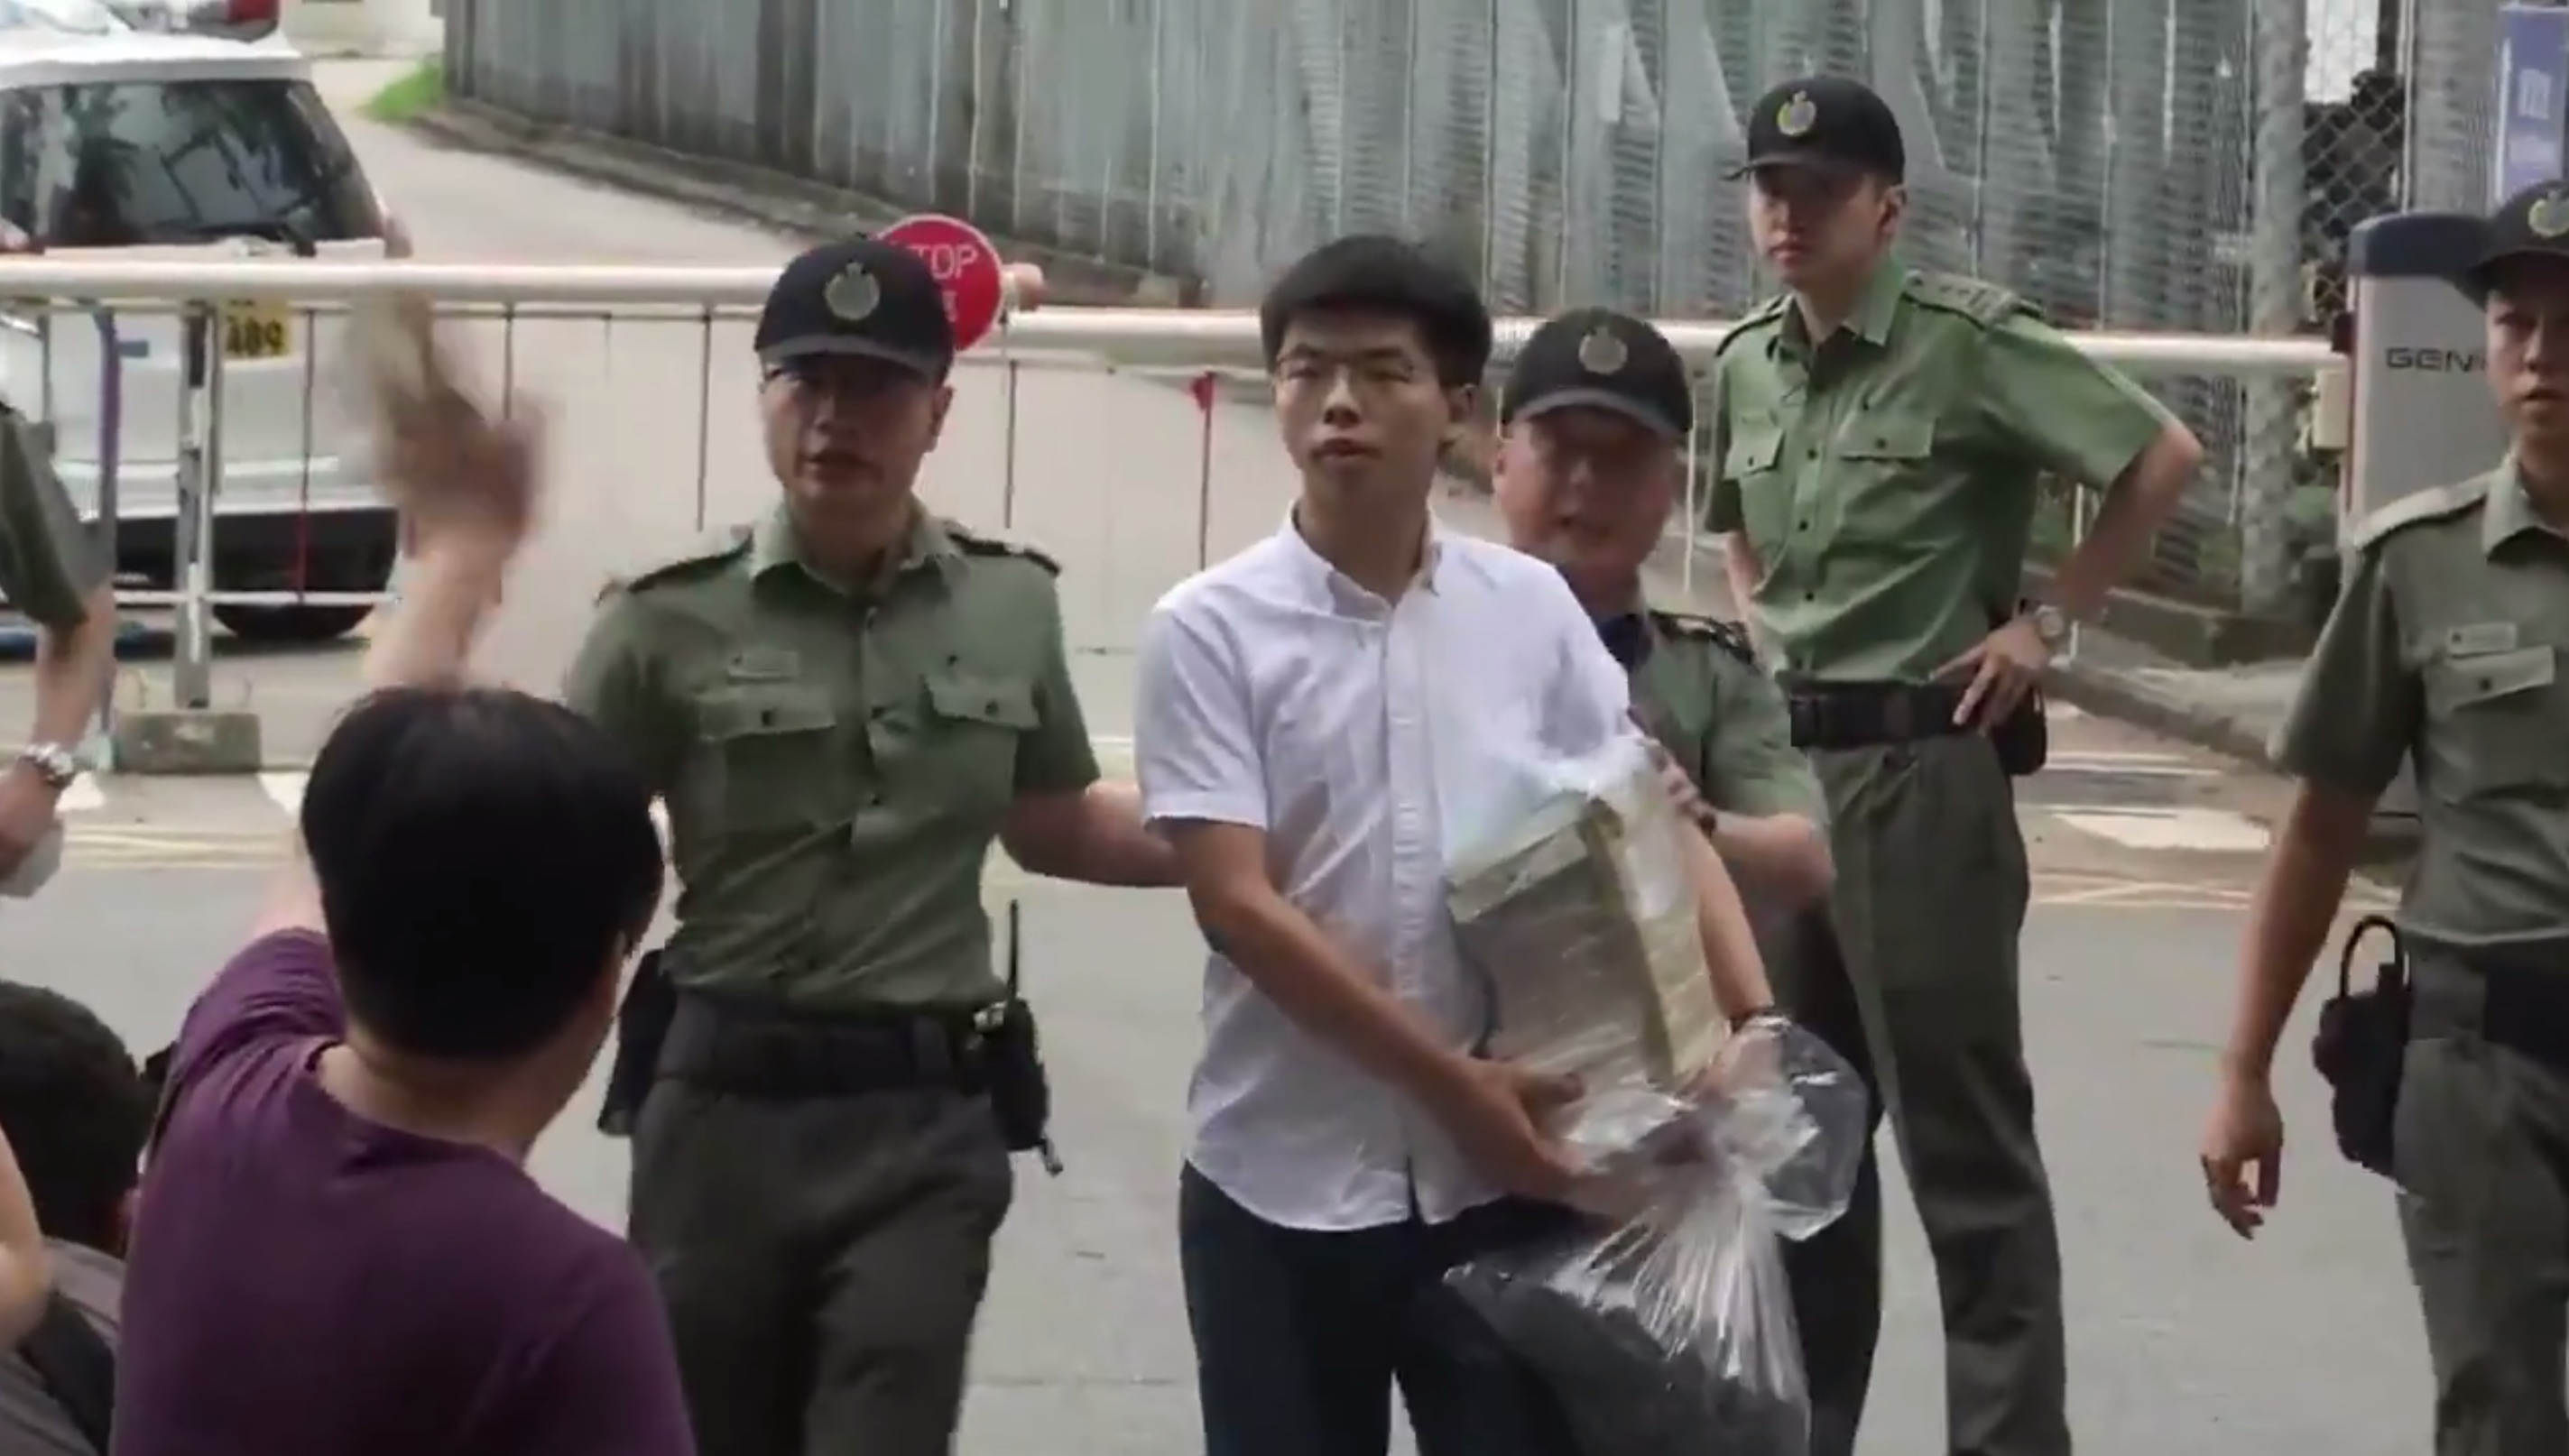 Pro-democracy activist Joshua Wong walks out of the Lai Chi Kok Correctional Institute this morning. Screengrab via Twitter.